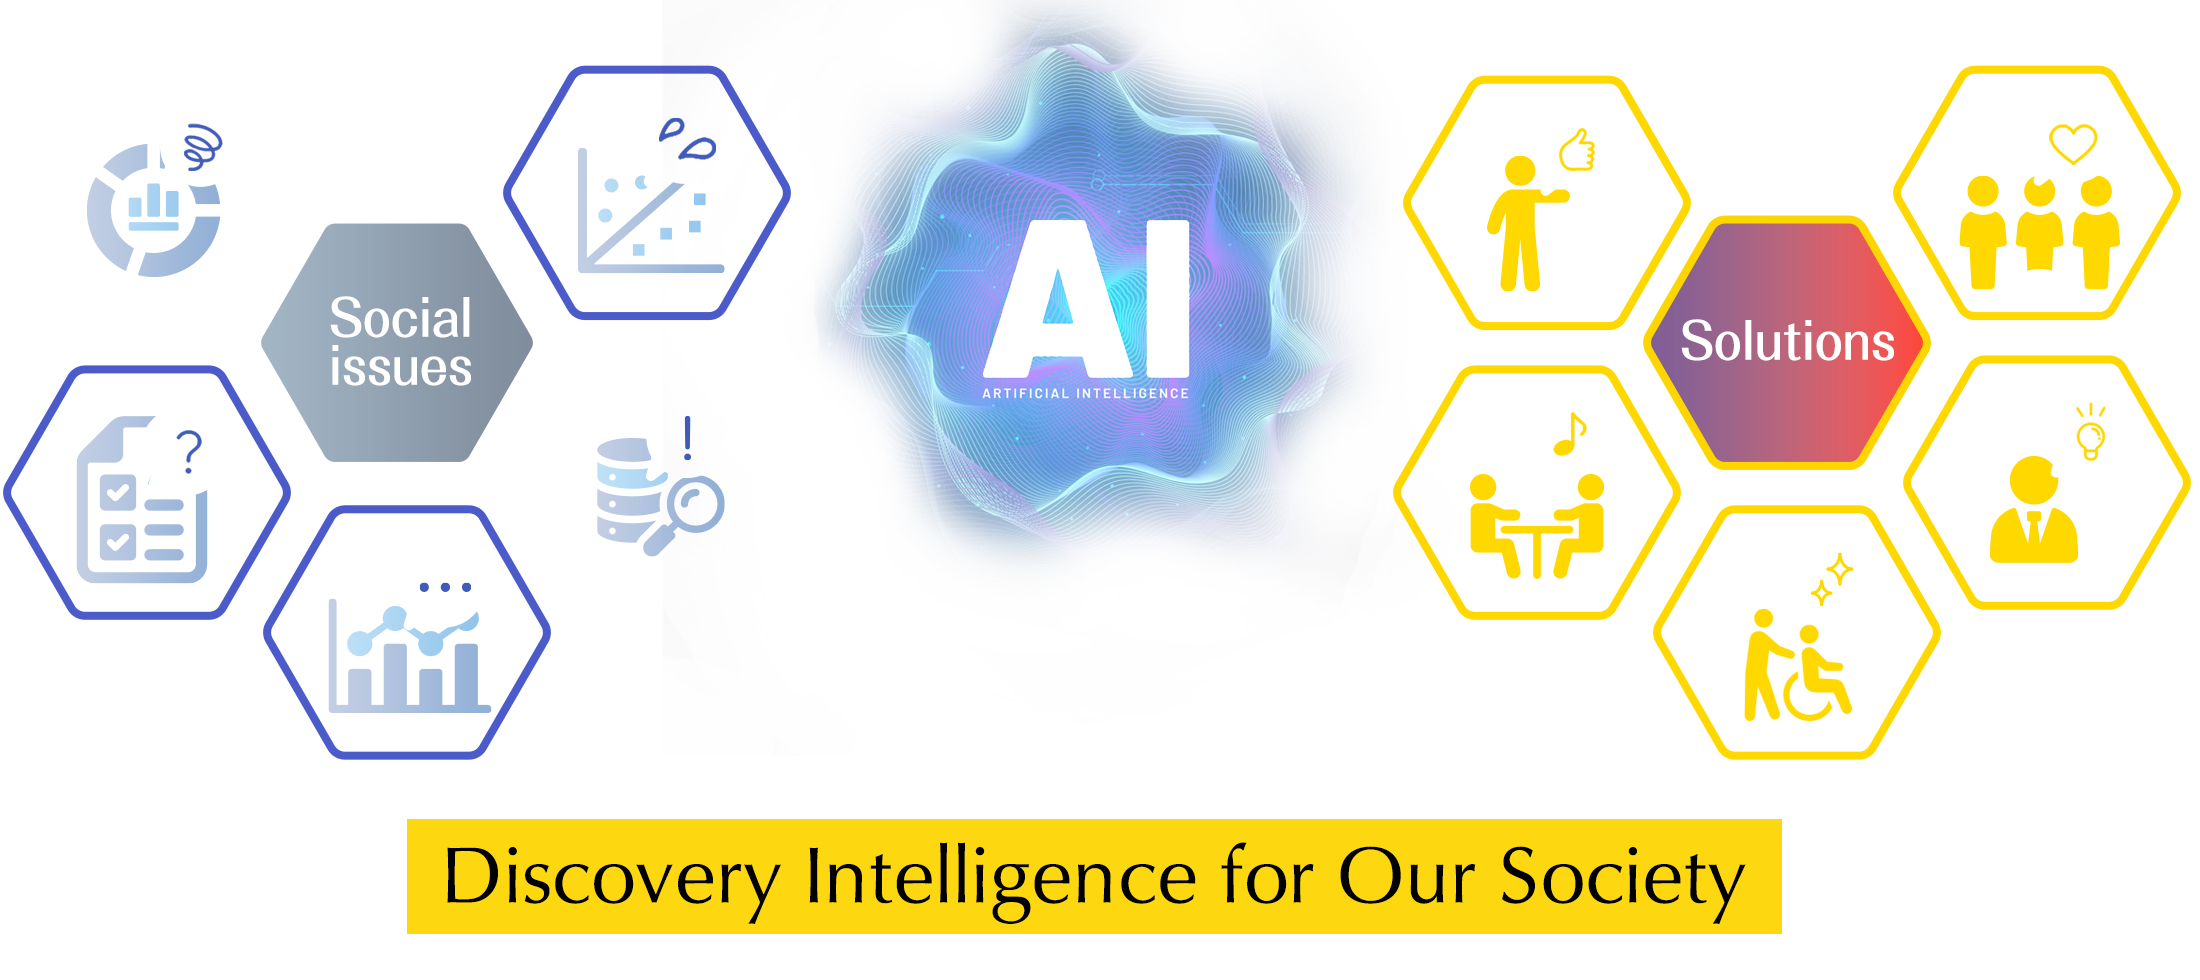 Discovery Intelligence for Our Society